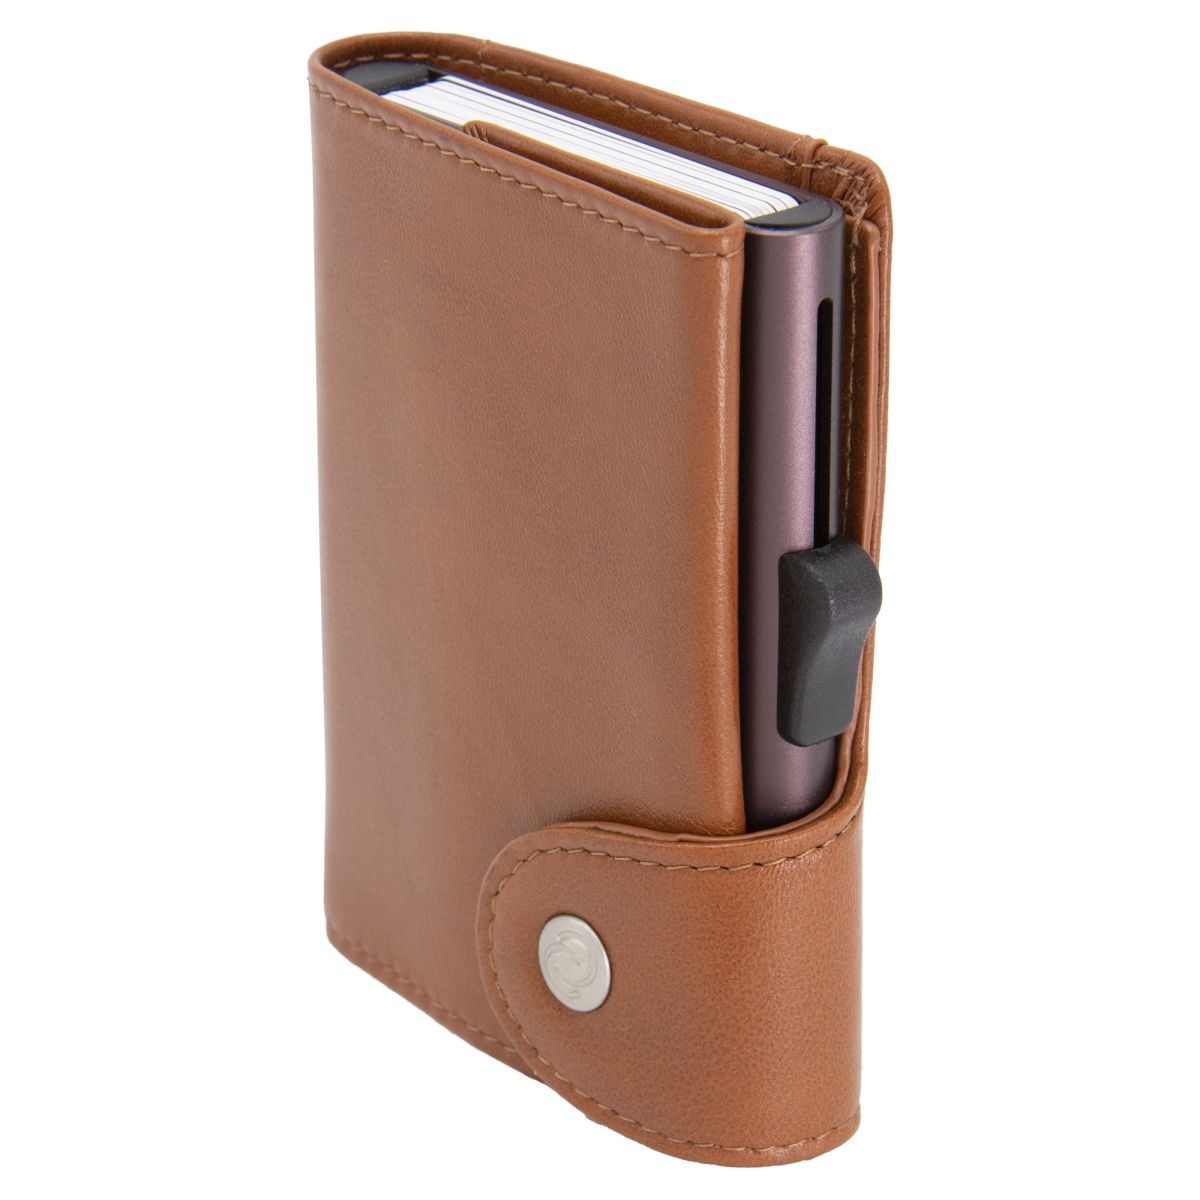 C-Secure XL Aluminum Card Holder with PU Leather - Brown